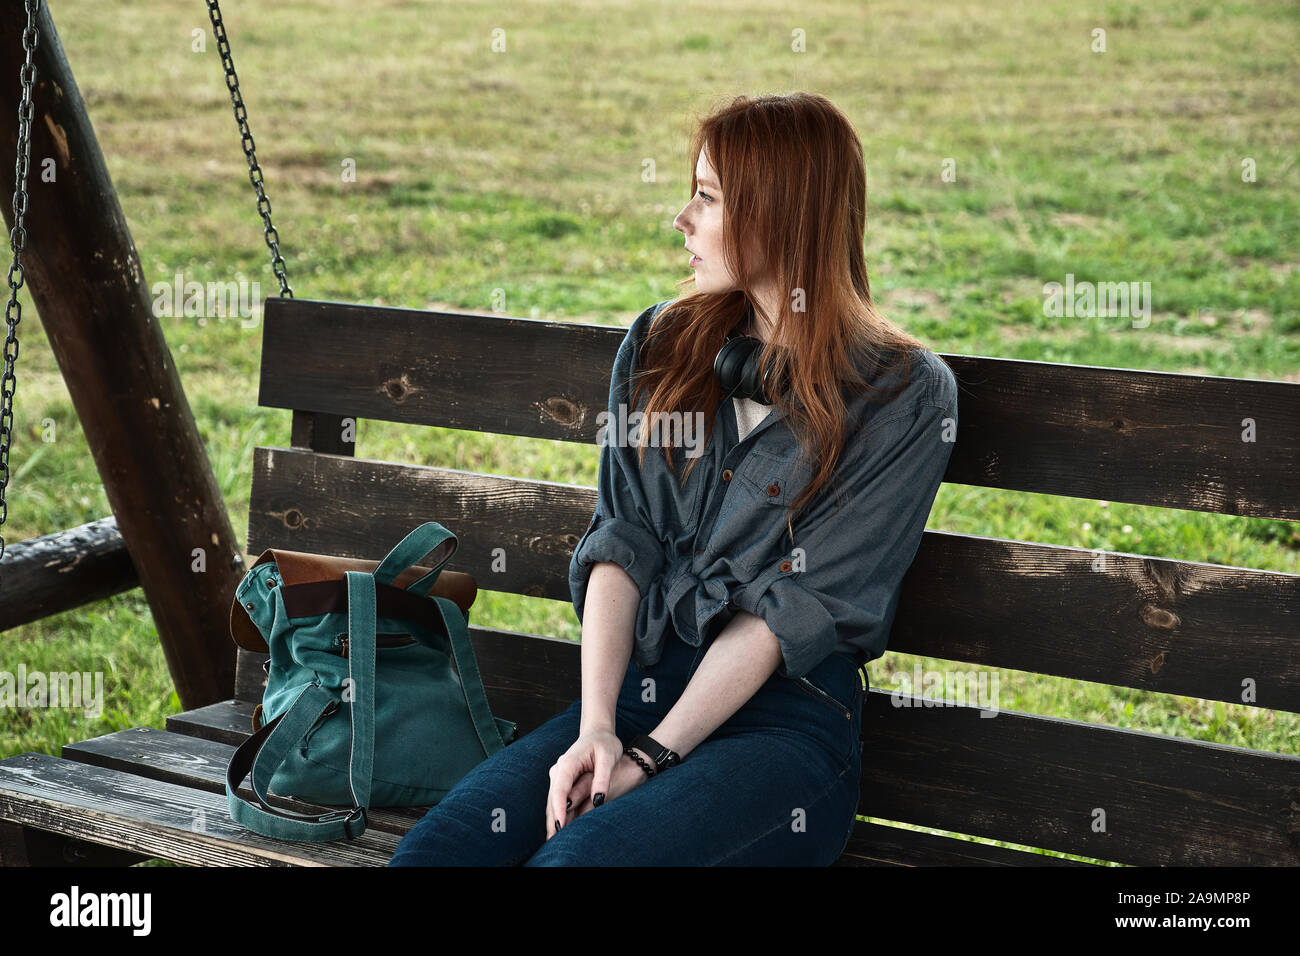 Red-haired girl sits with a backpack on a wooden bench swing and looks away. Stock Photo